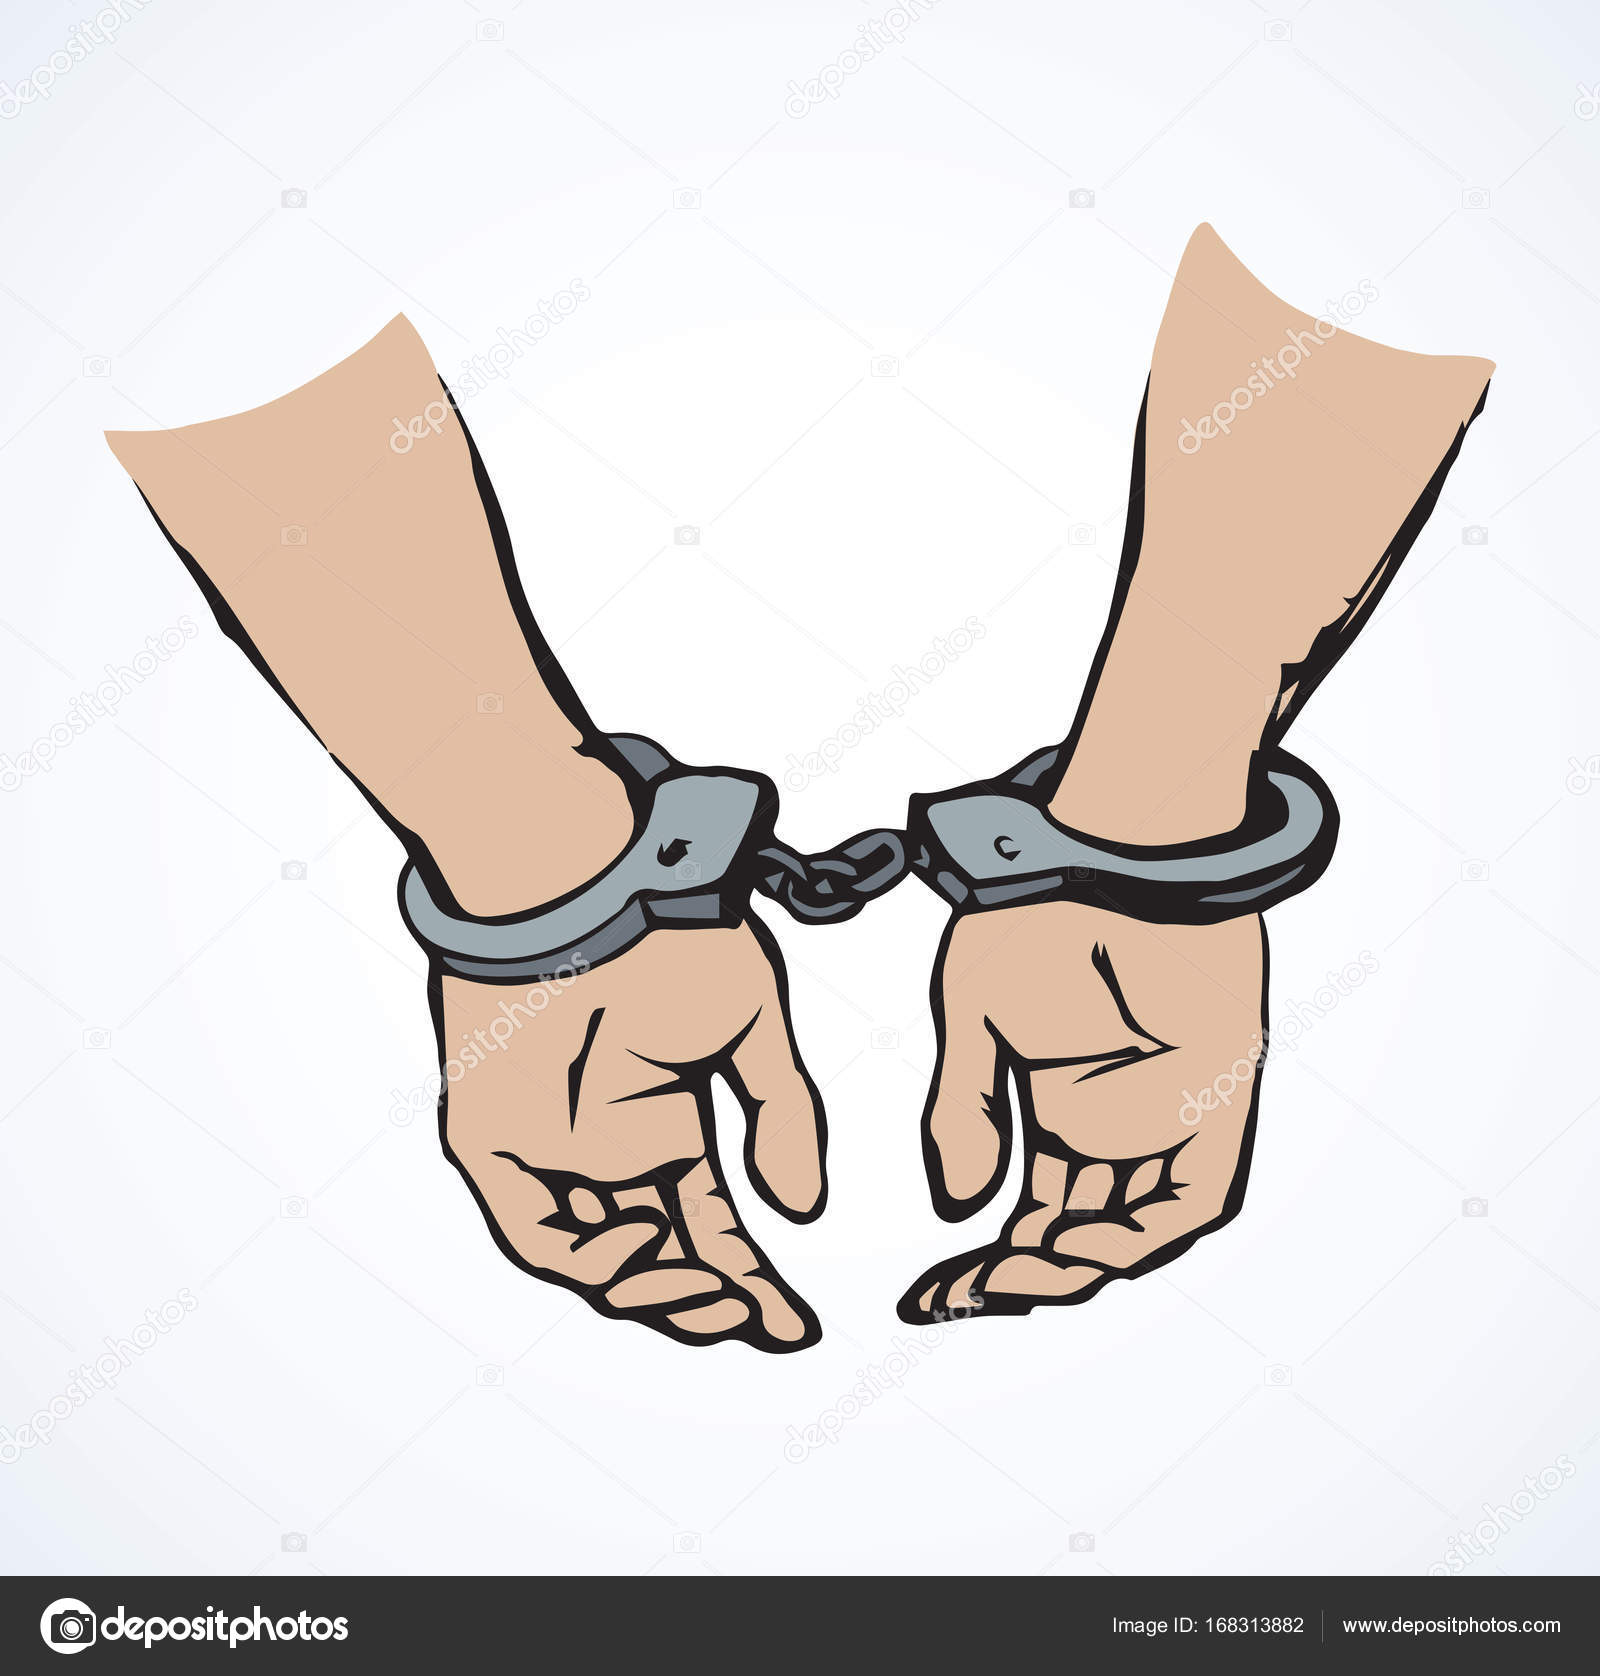 Hands In Handcuffs Drawing at GetDrawings Free download